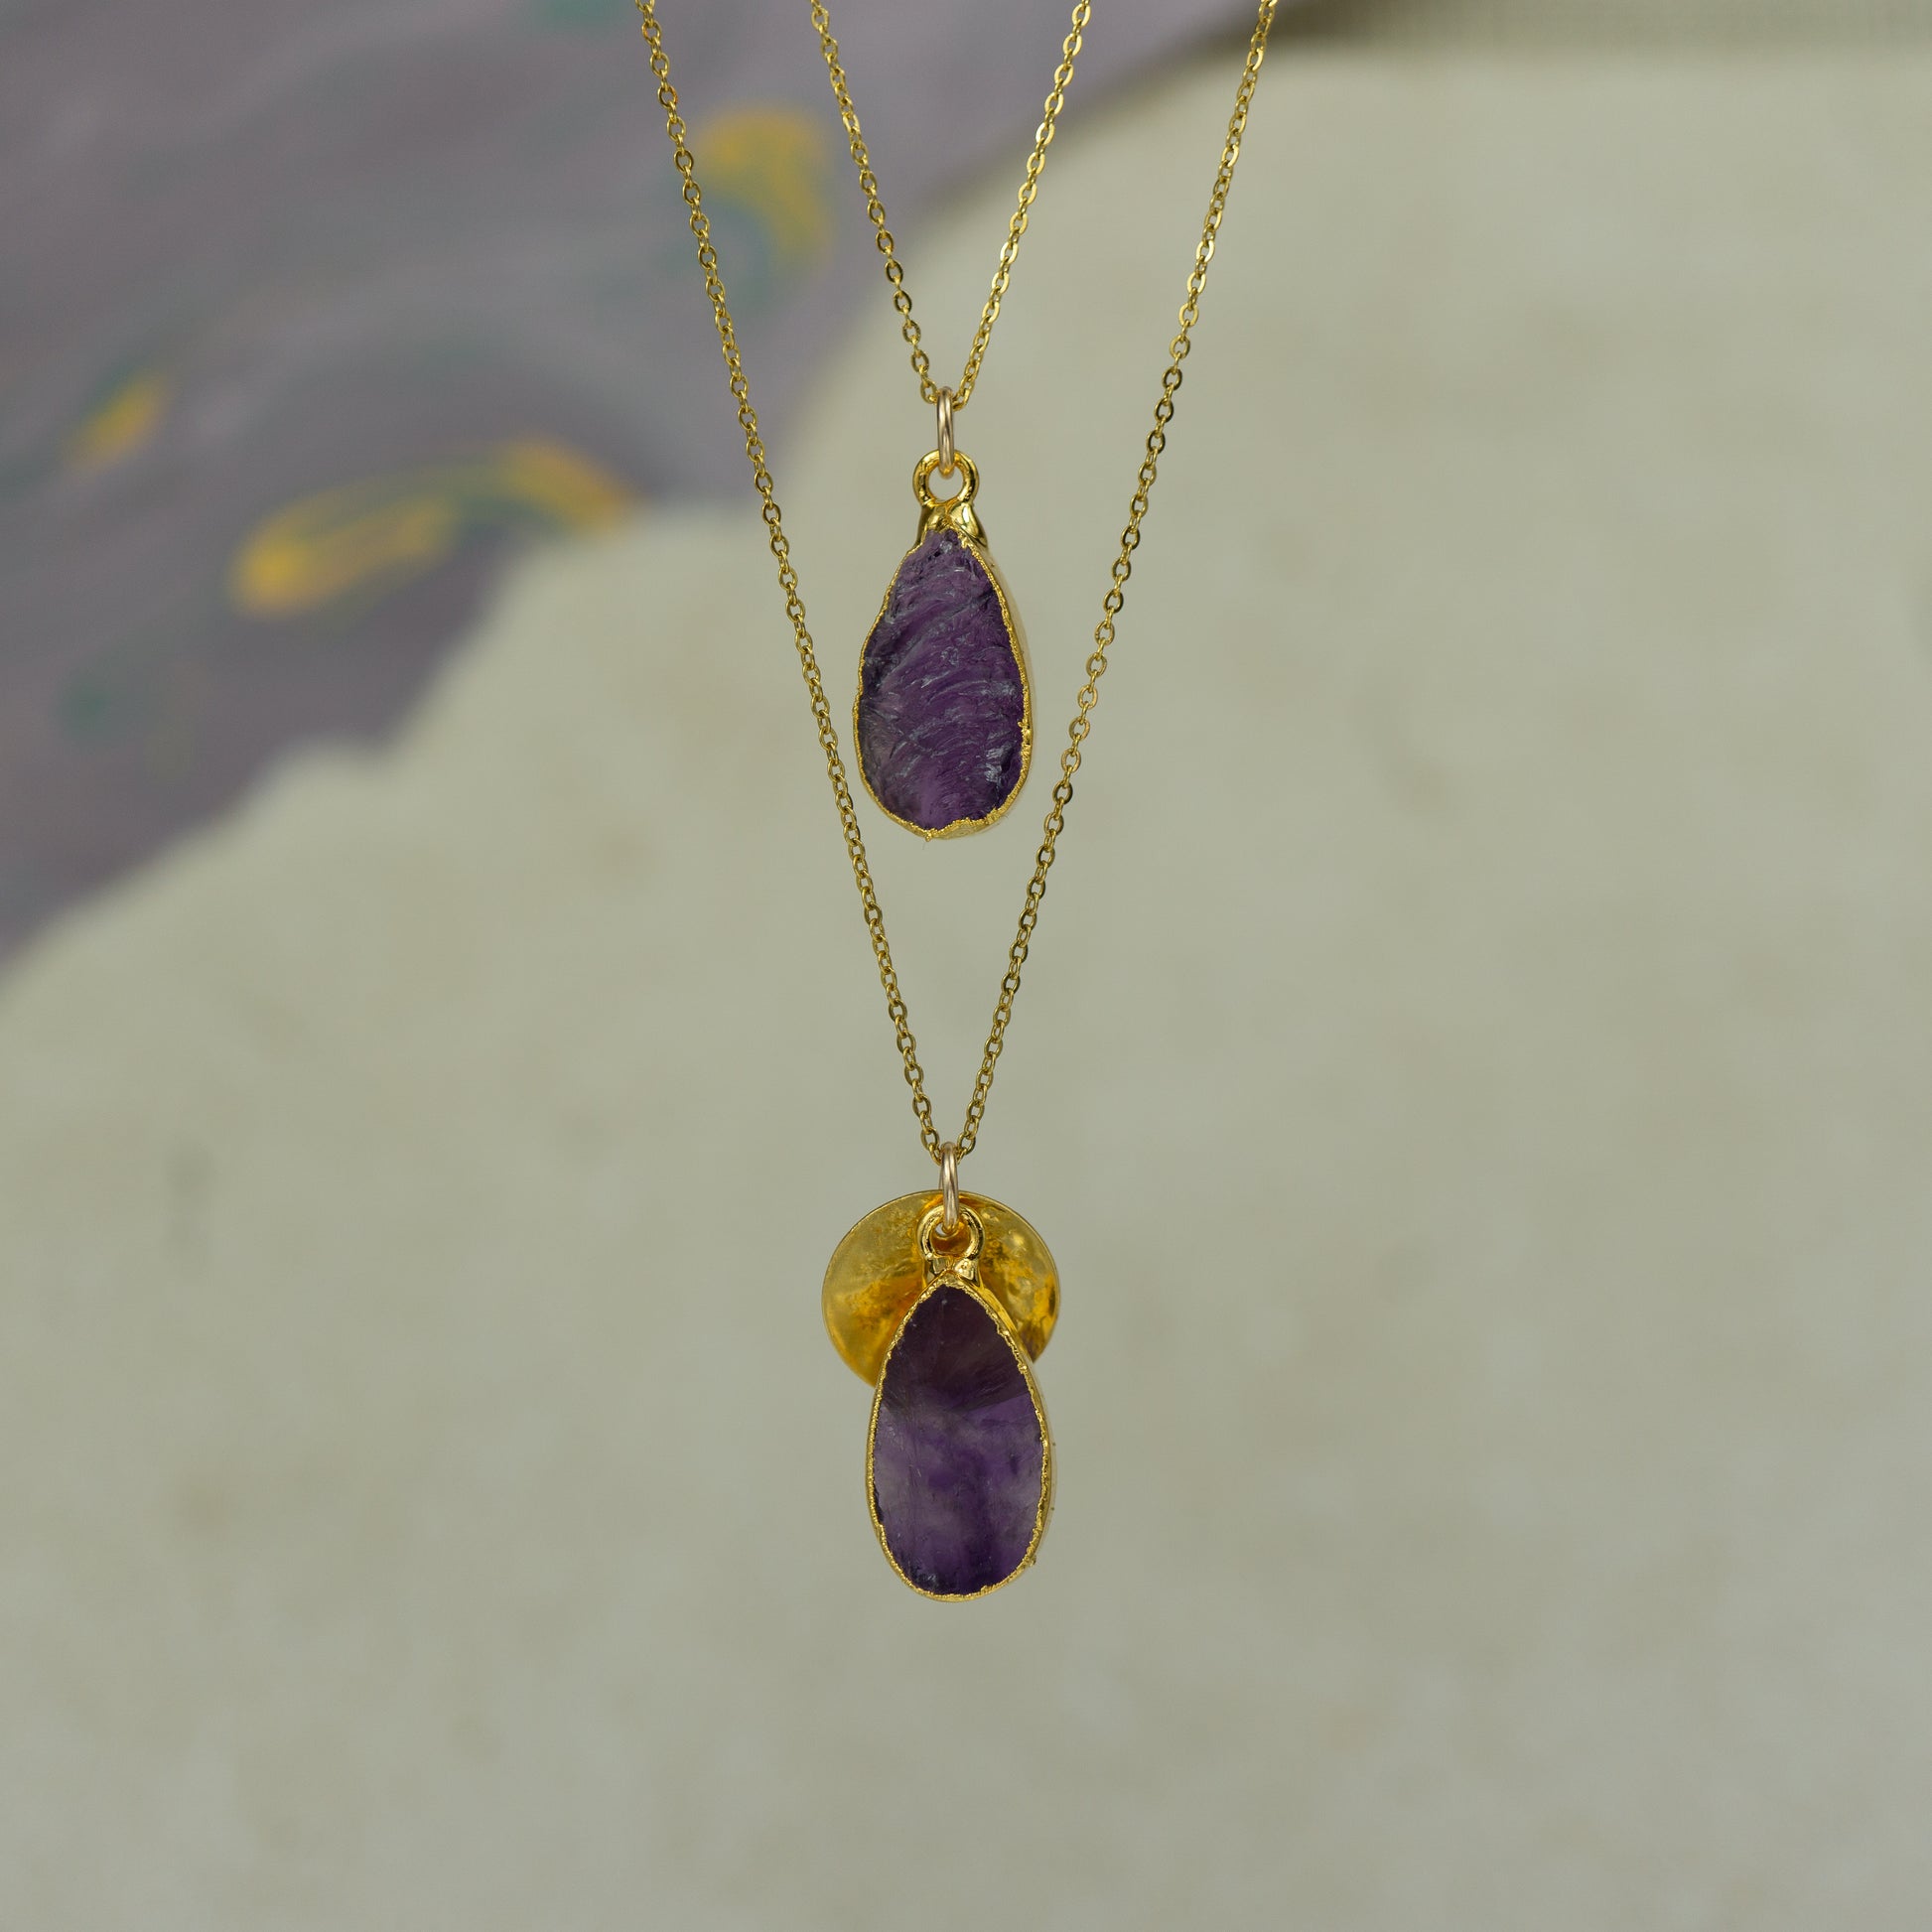 Raw purple amethyst teardrop pear shaped pendants finished in gold on a chains.